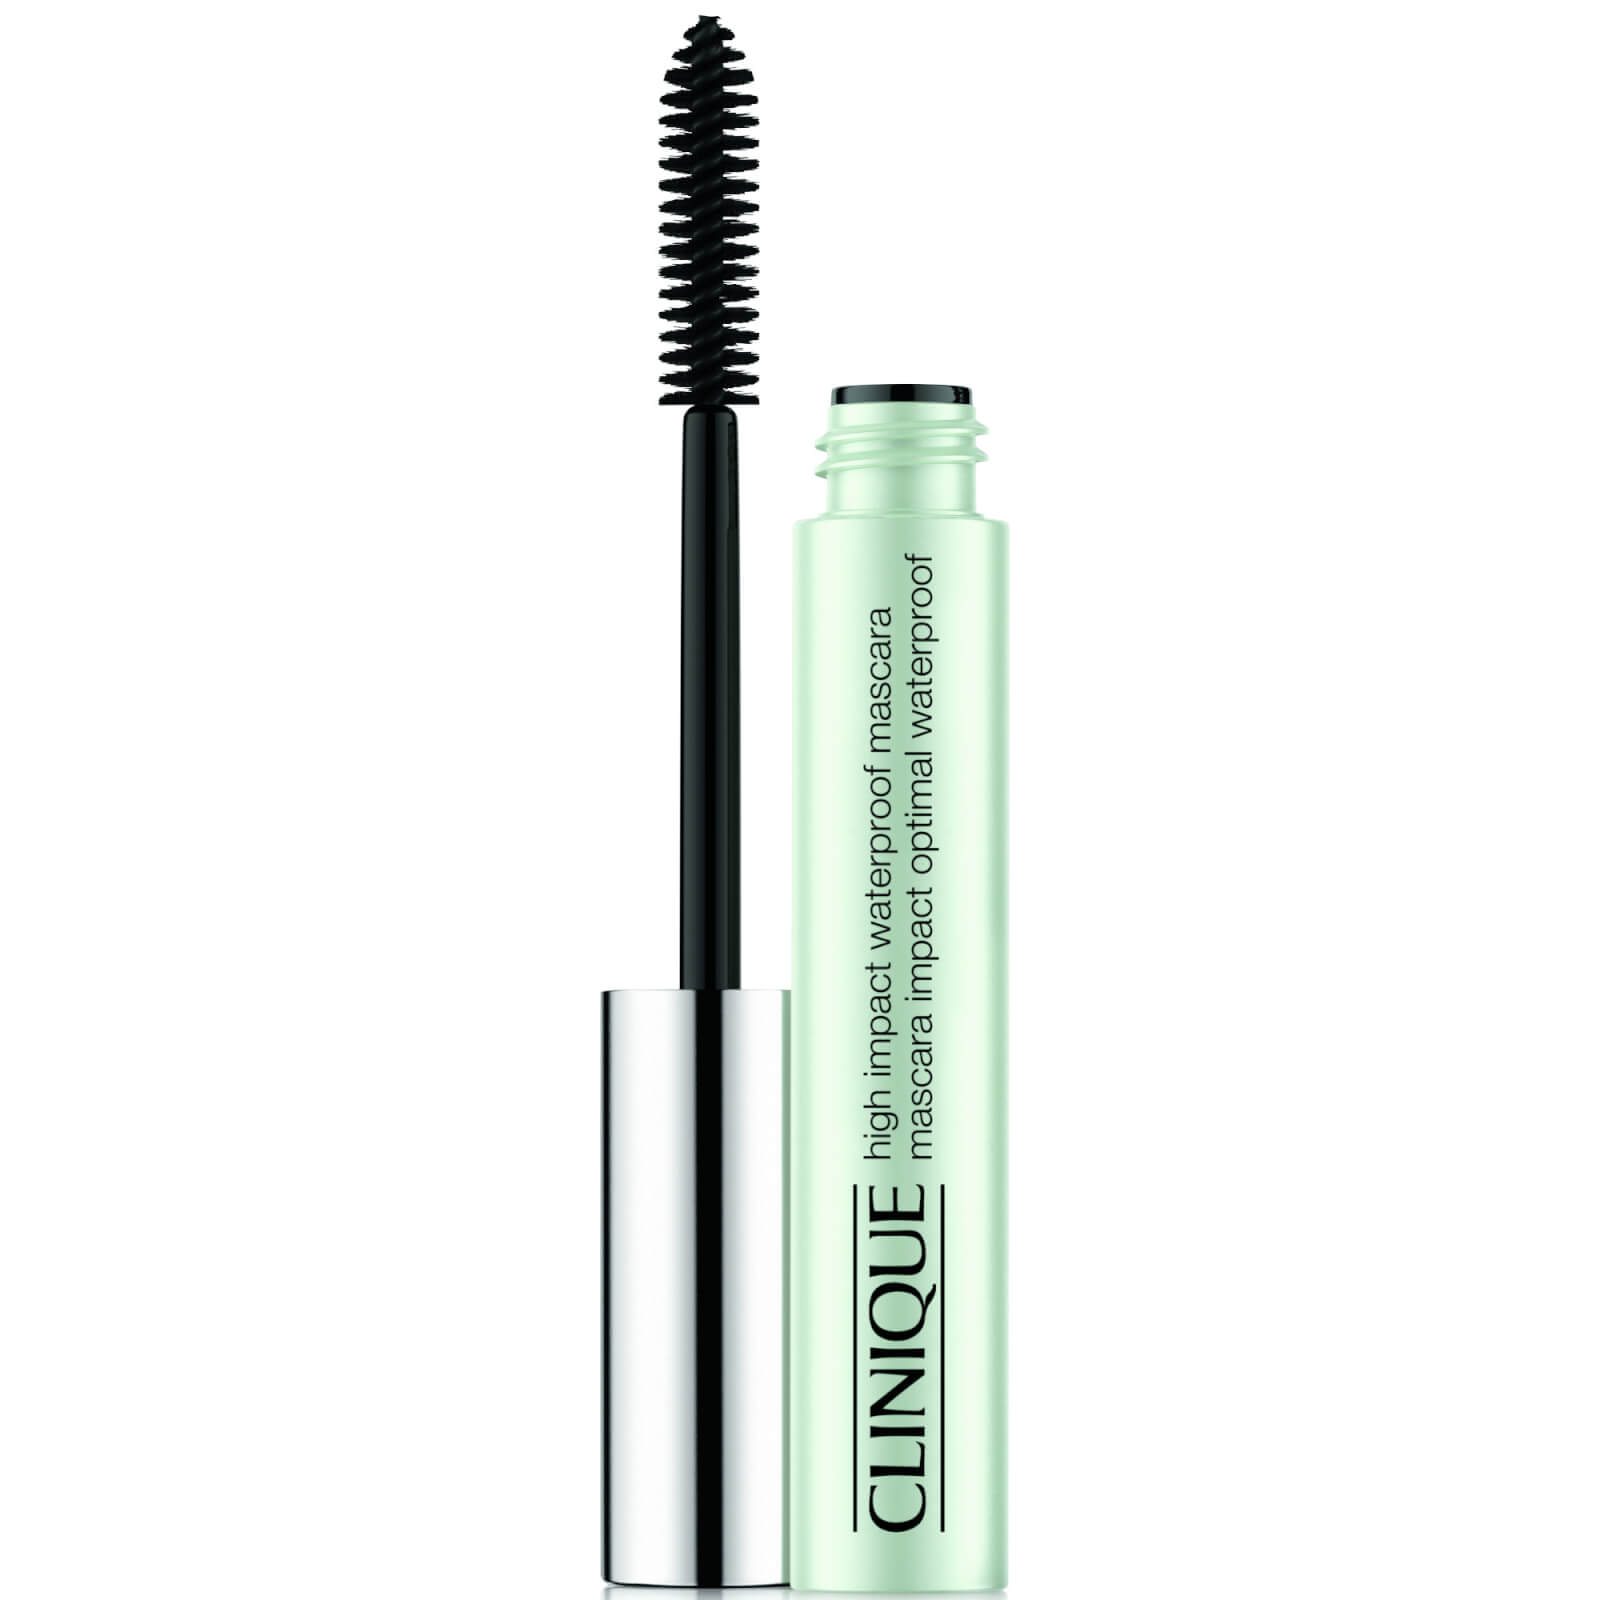 Image of Clinique High Impact Waterproof Mascara - Black 10g